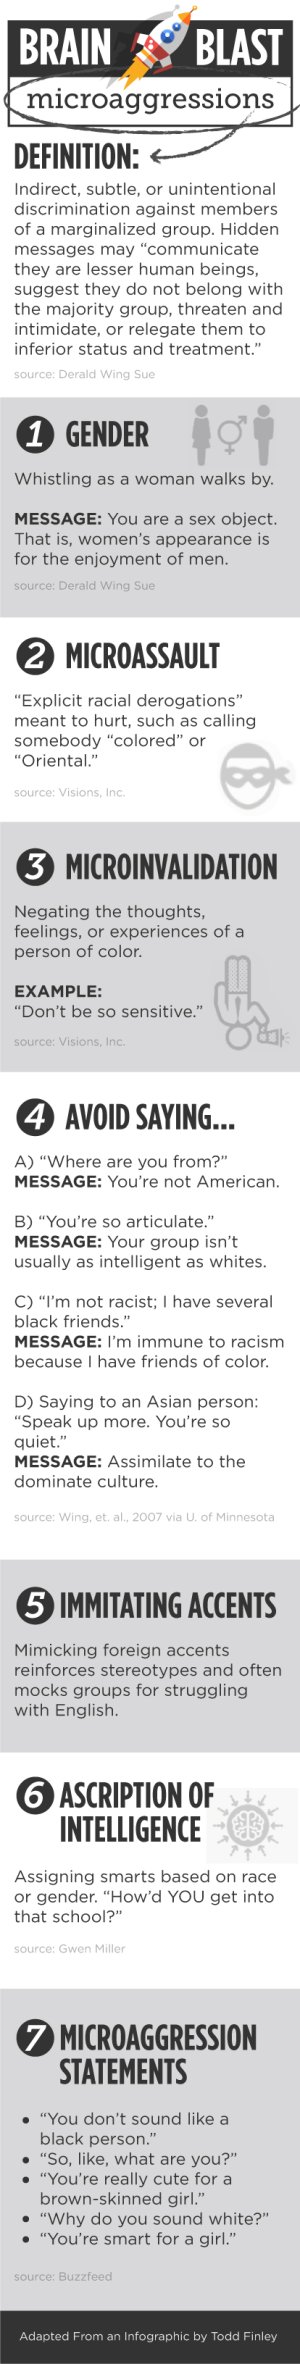 Infographic of Microaggressions by Todd Finley